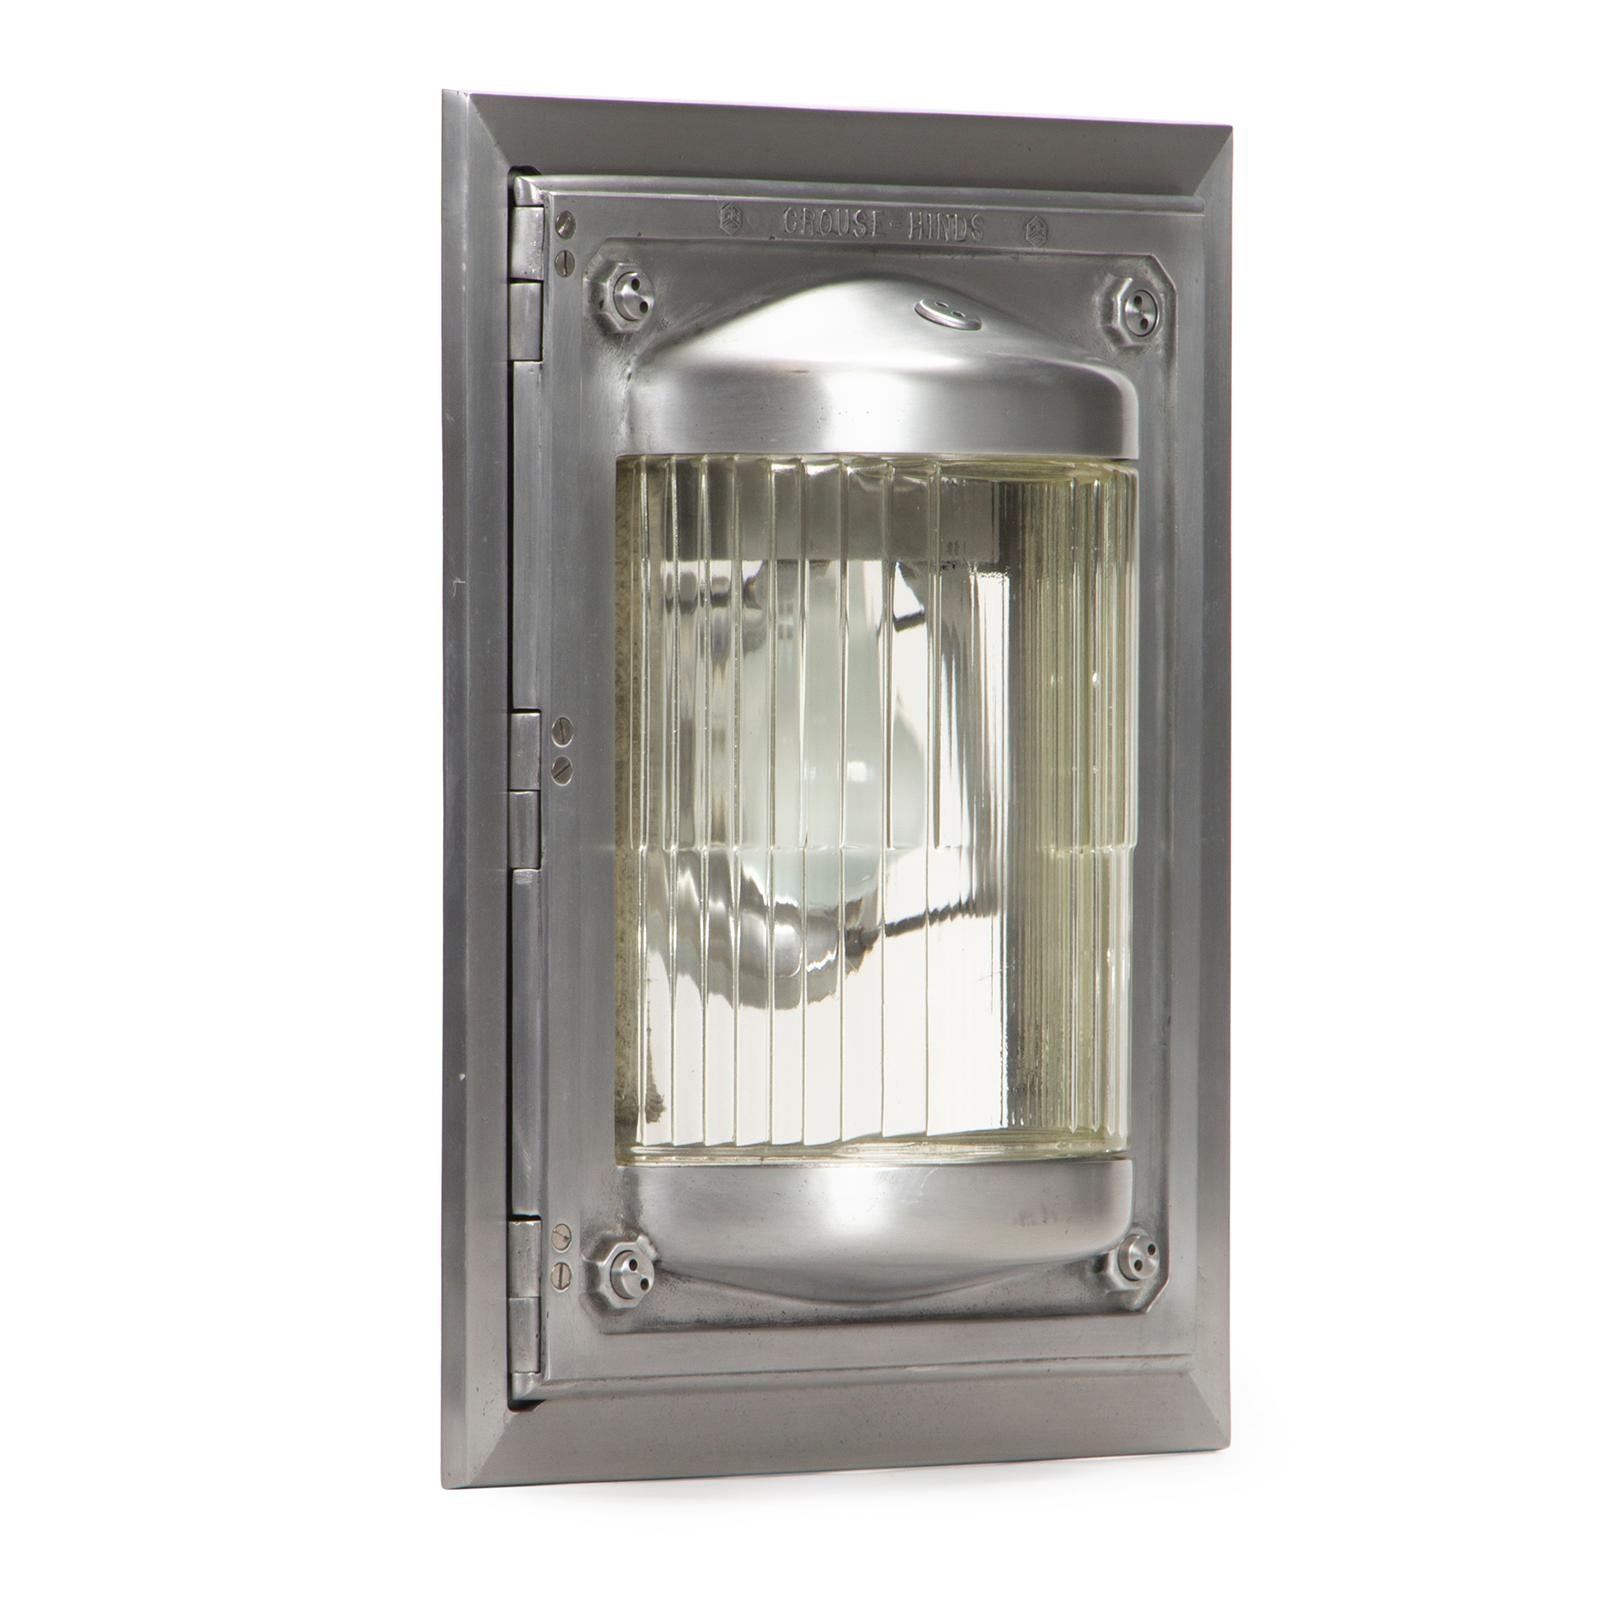 A large-scale, flush mount aluminum wall light with a ribbed cast glass shade, bearing the manufacturer's name. Similar to lights installed on the Hoover Dam.